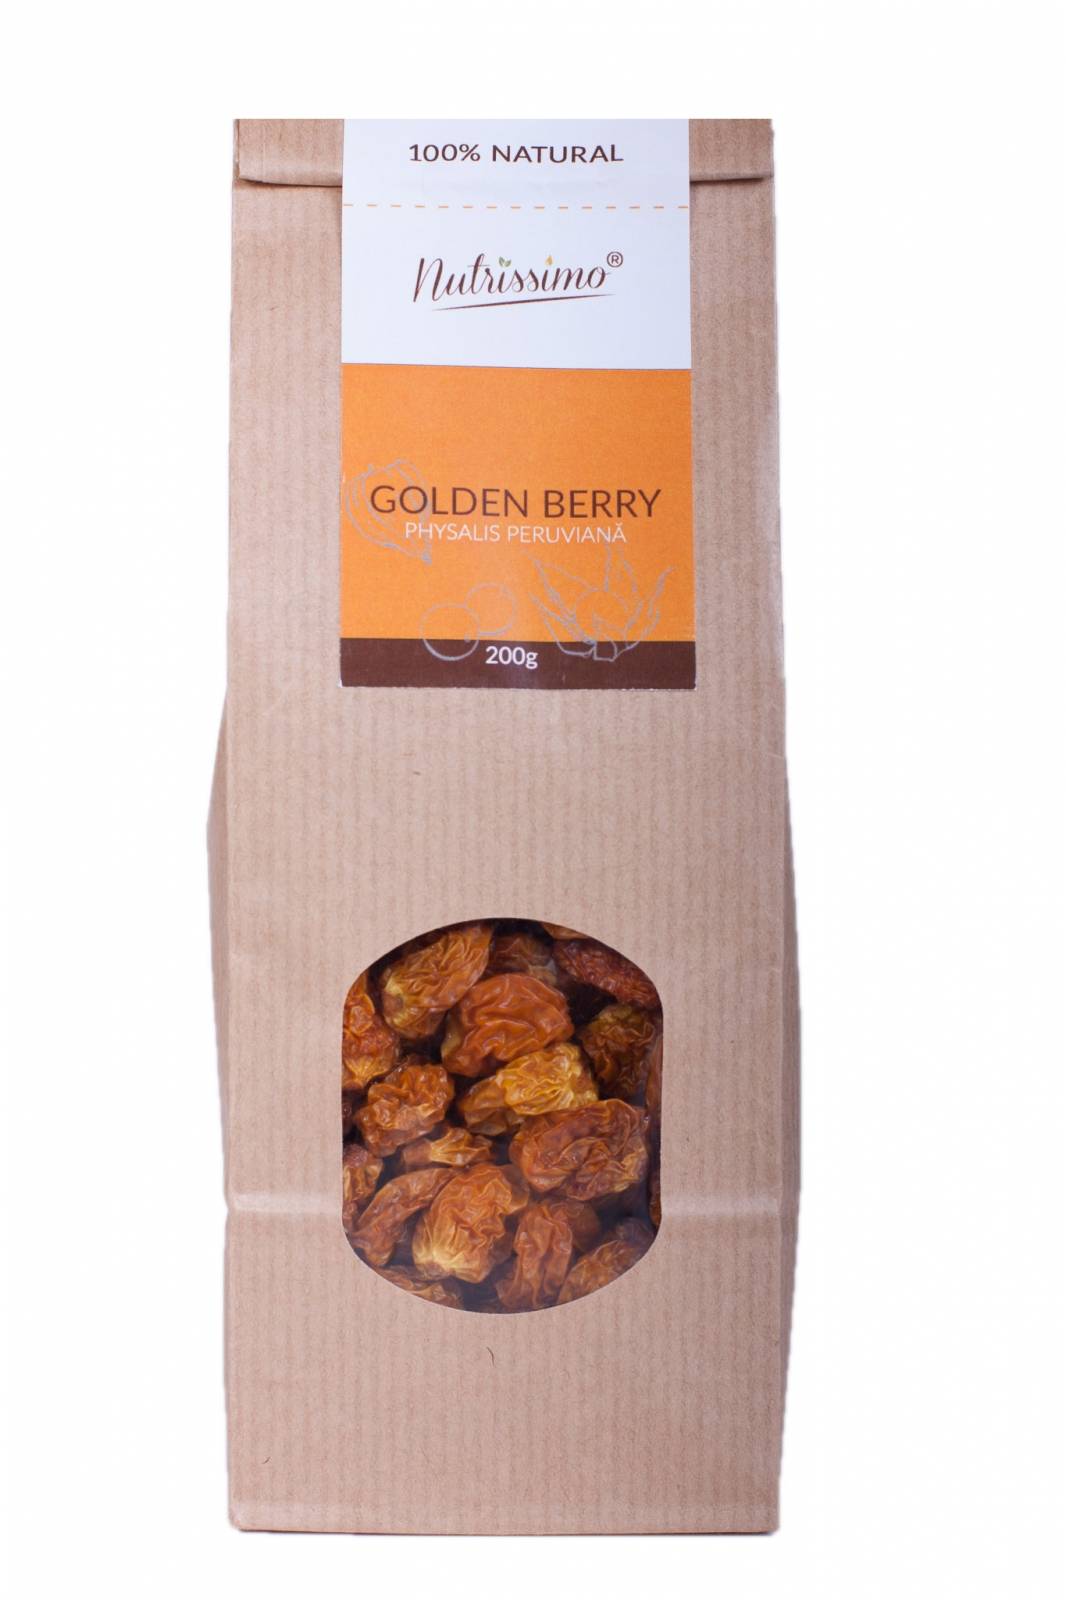 Golden berry, physalis uscate, 200g - nutrissimo